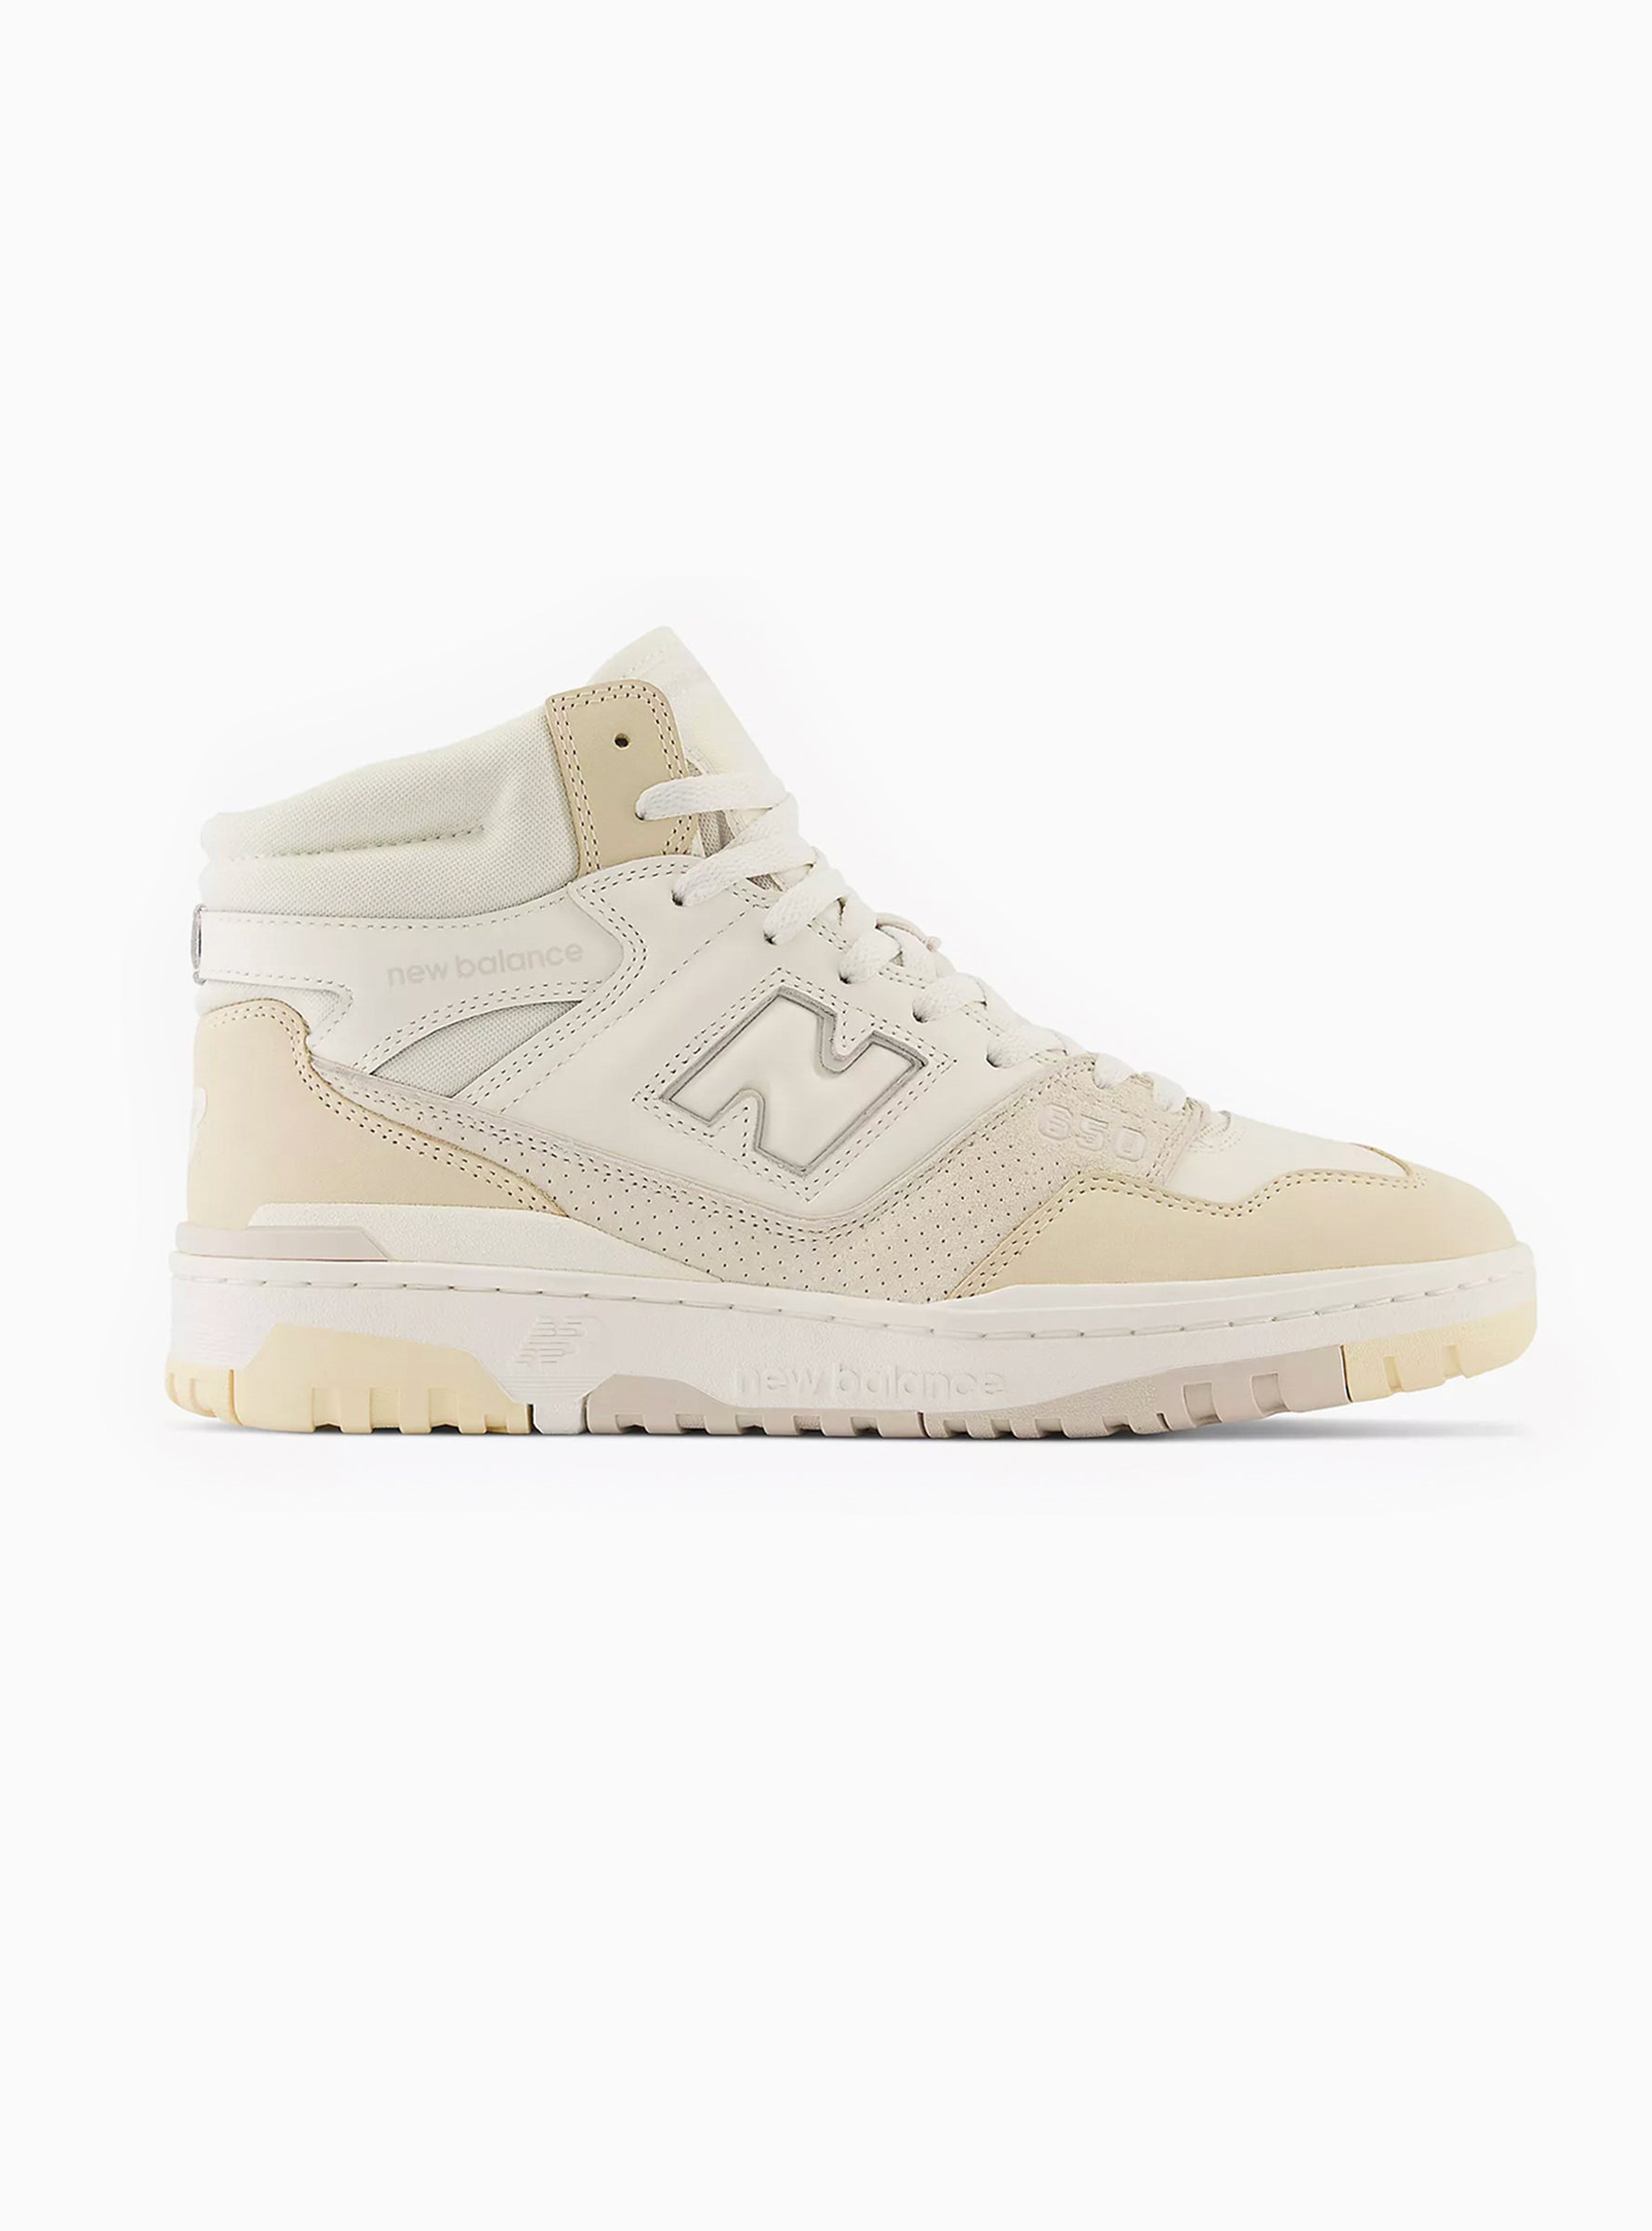 BB650RPC Sneakers Beige & Macadamia Nut by New Balance | Couverture ...